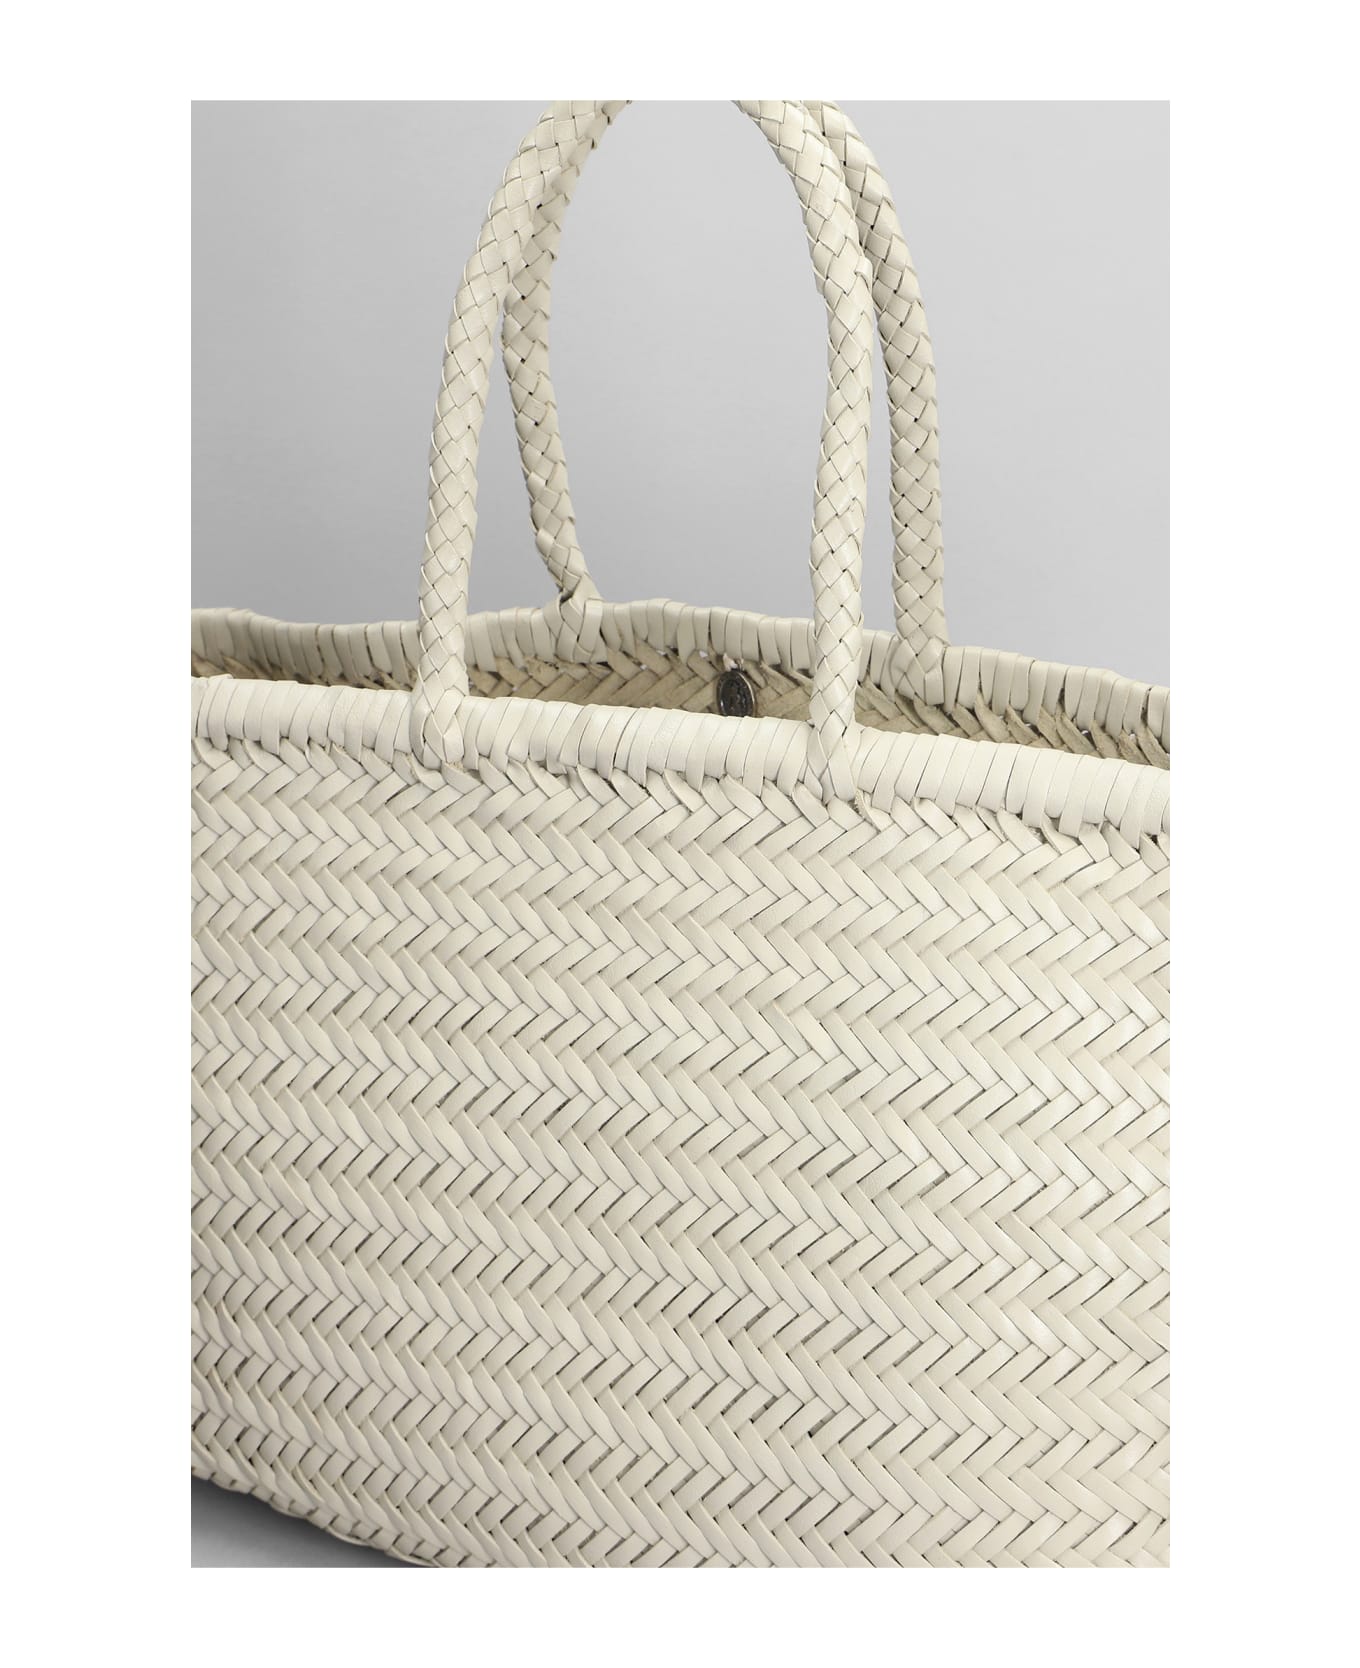 Dragon Diffusion Bamboo Triple Jump Tote In Beige Leather - beige